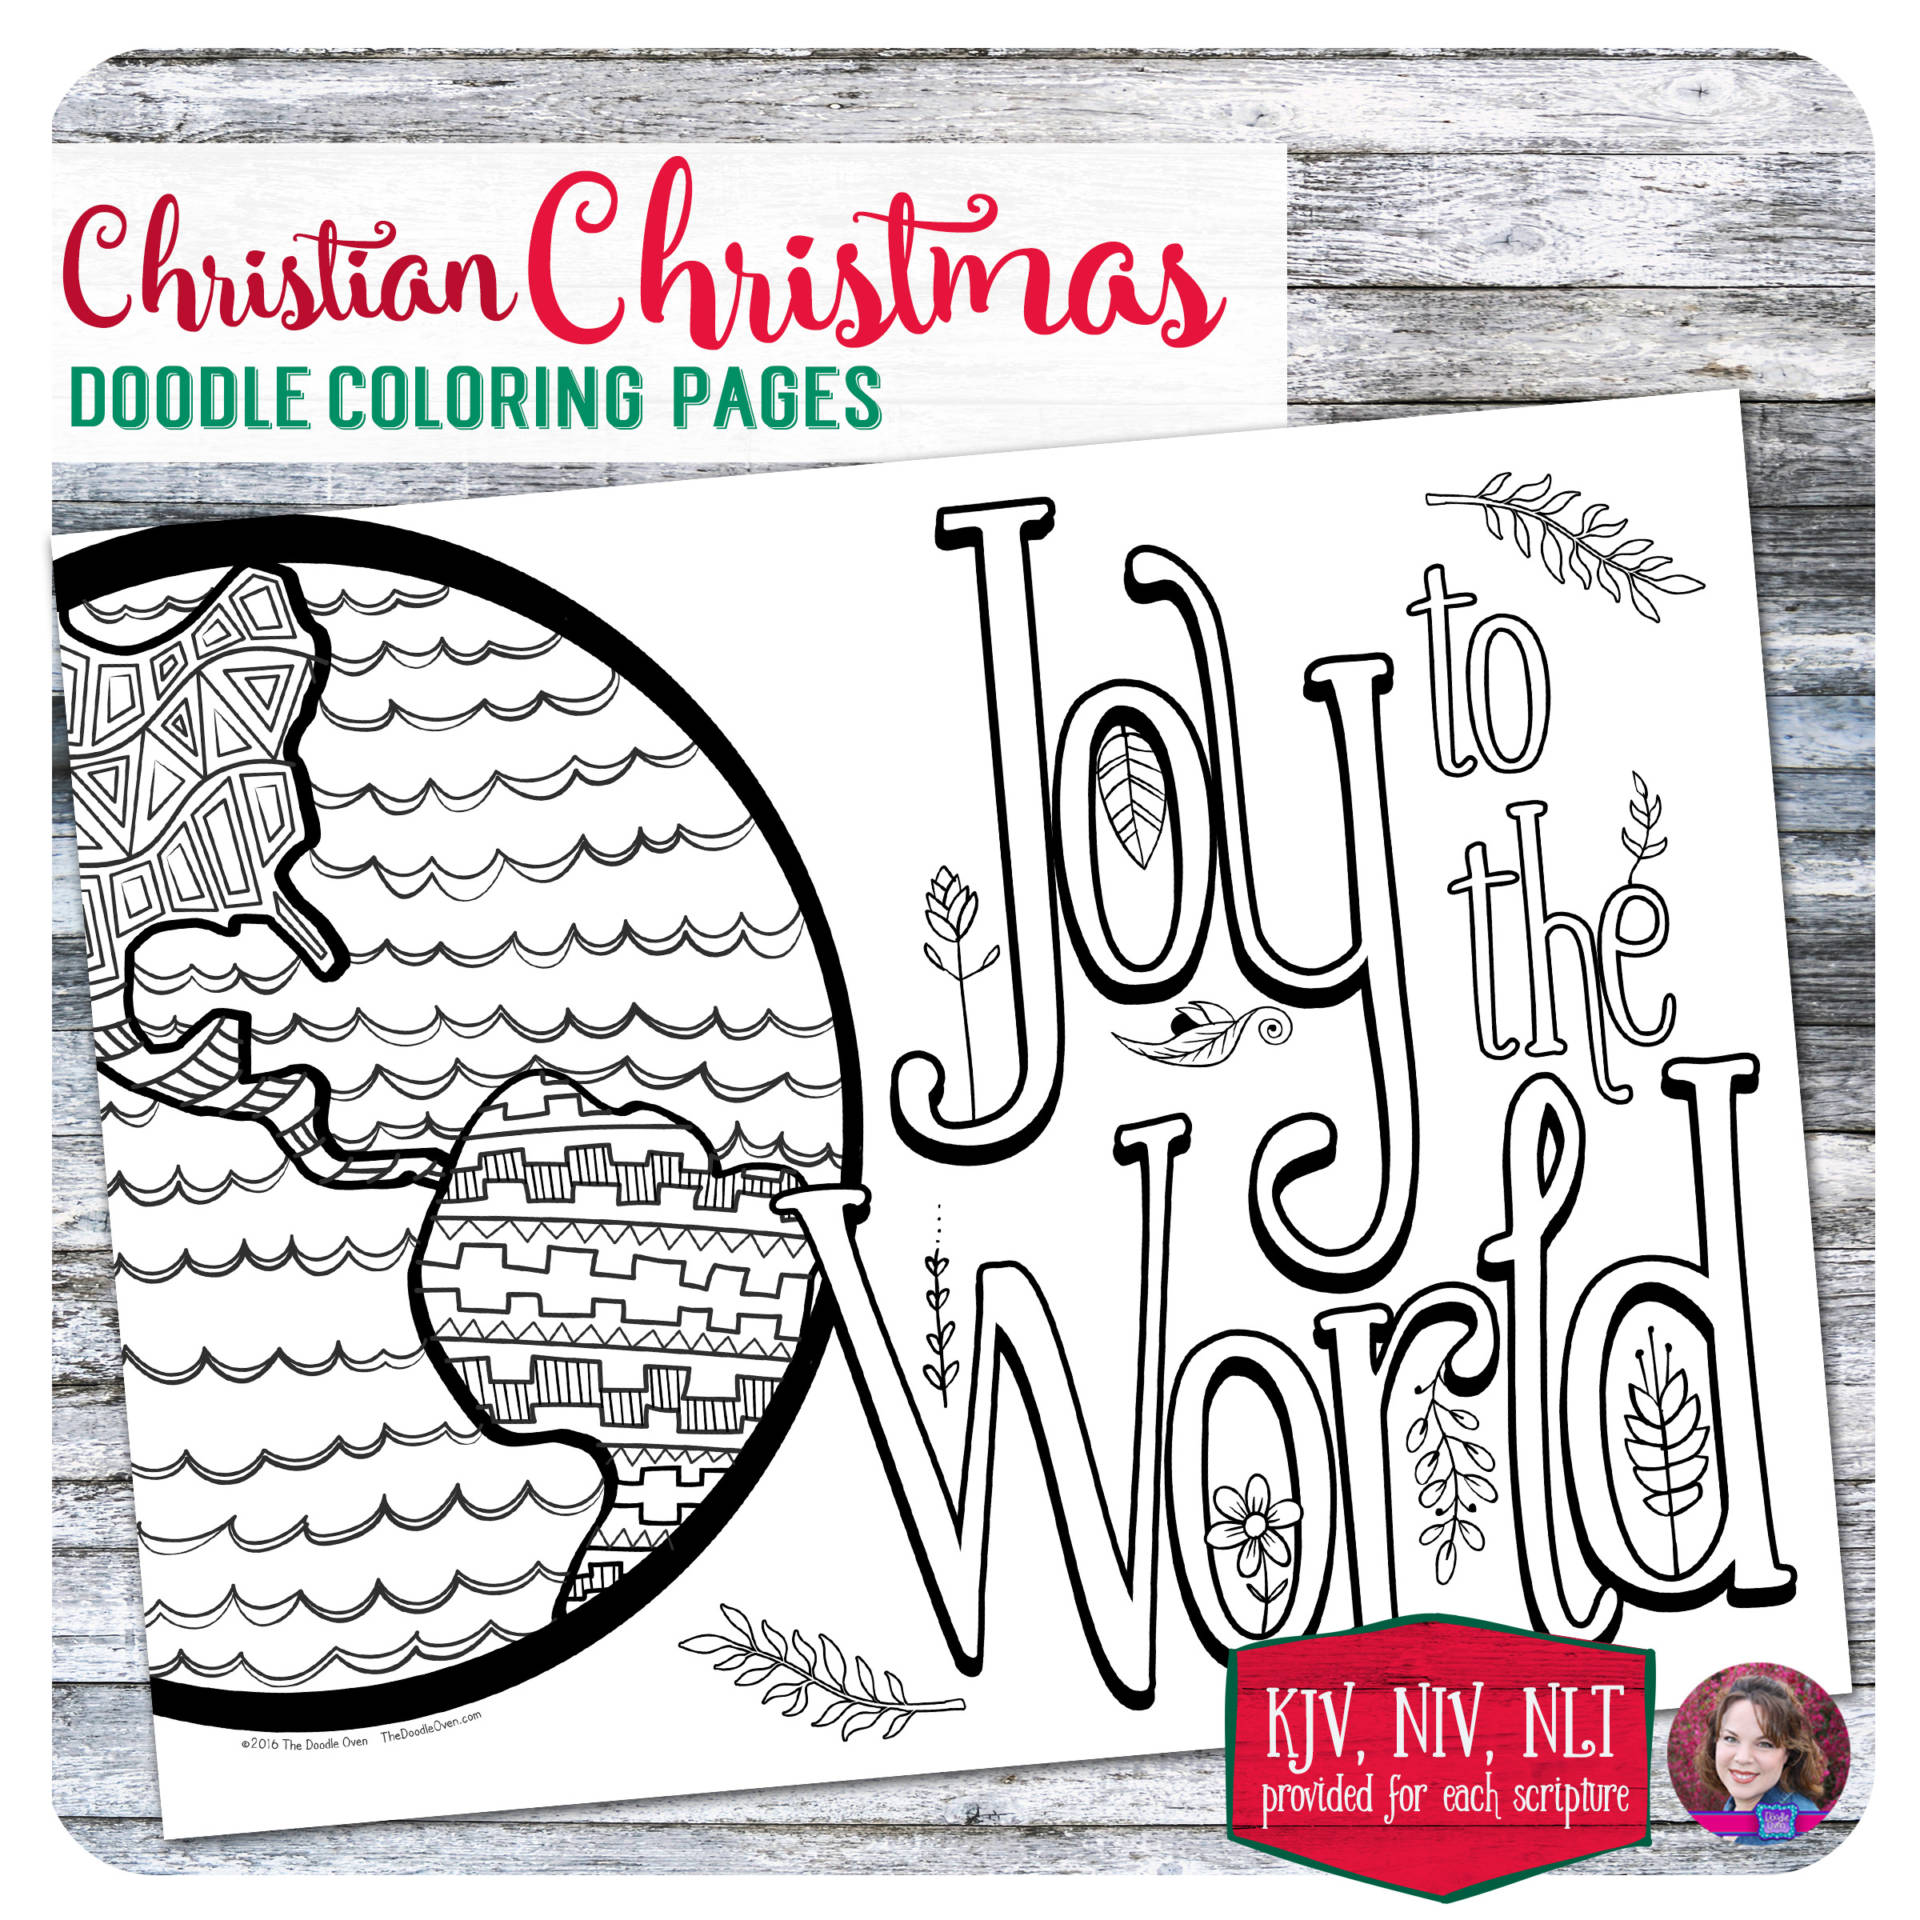 Christian Christmas Doodle Coloring Pages 6 Designs Heidi Babin